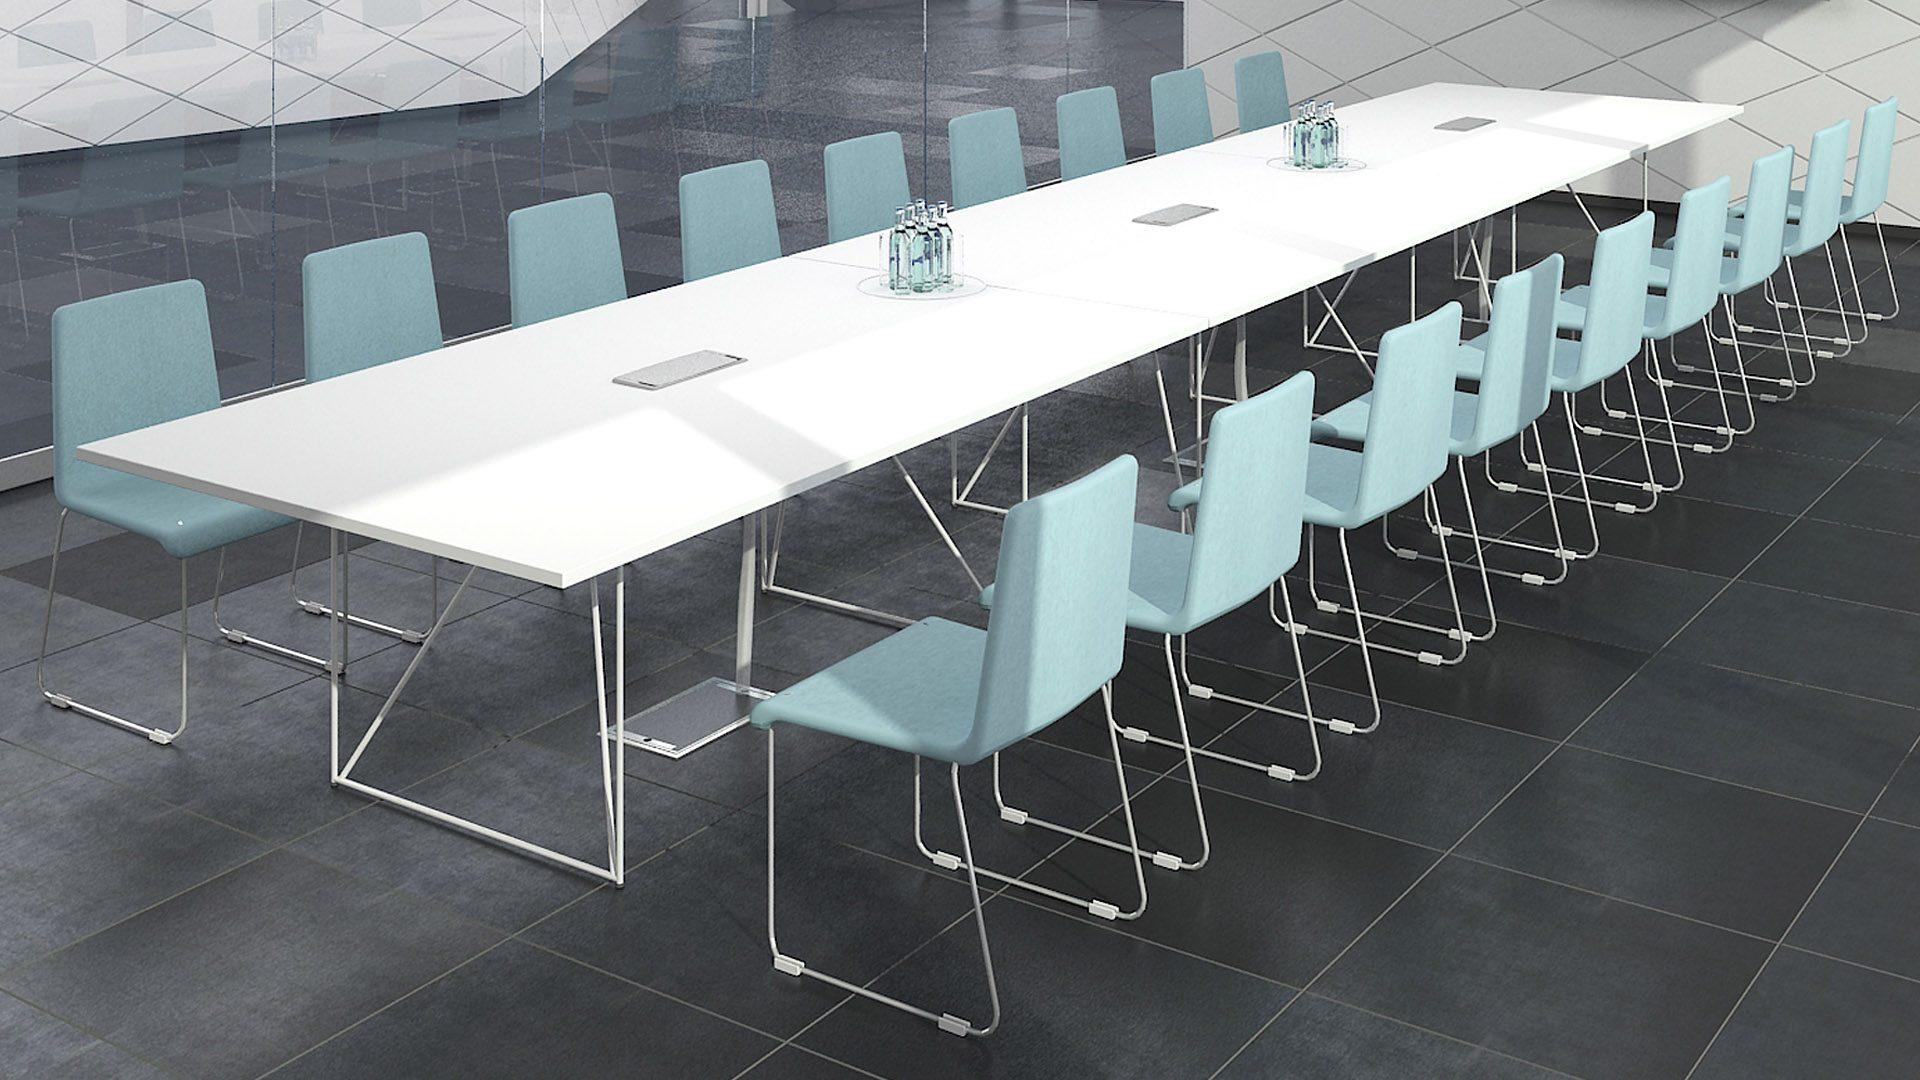 MOON conference chairs can be easily arranged in rows using couplers and stack up to 5 chairs high